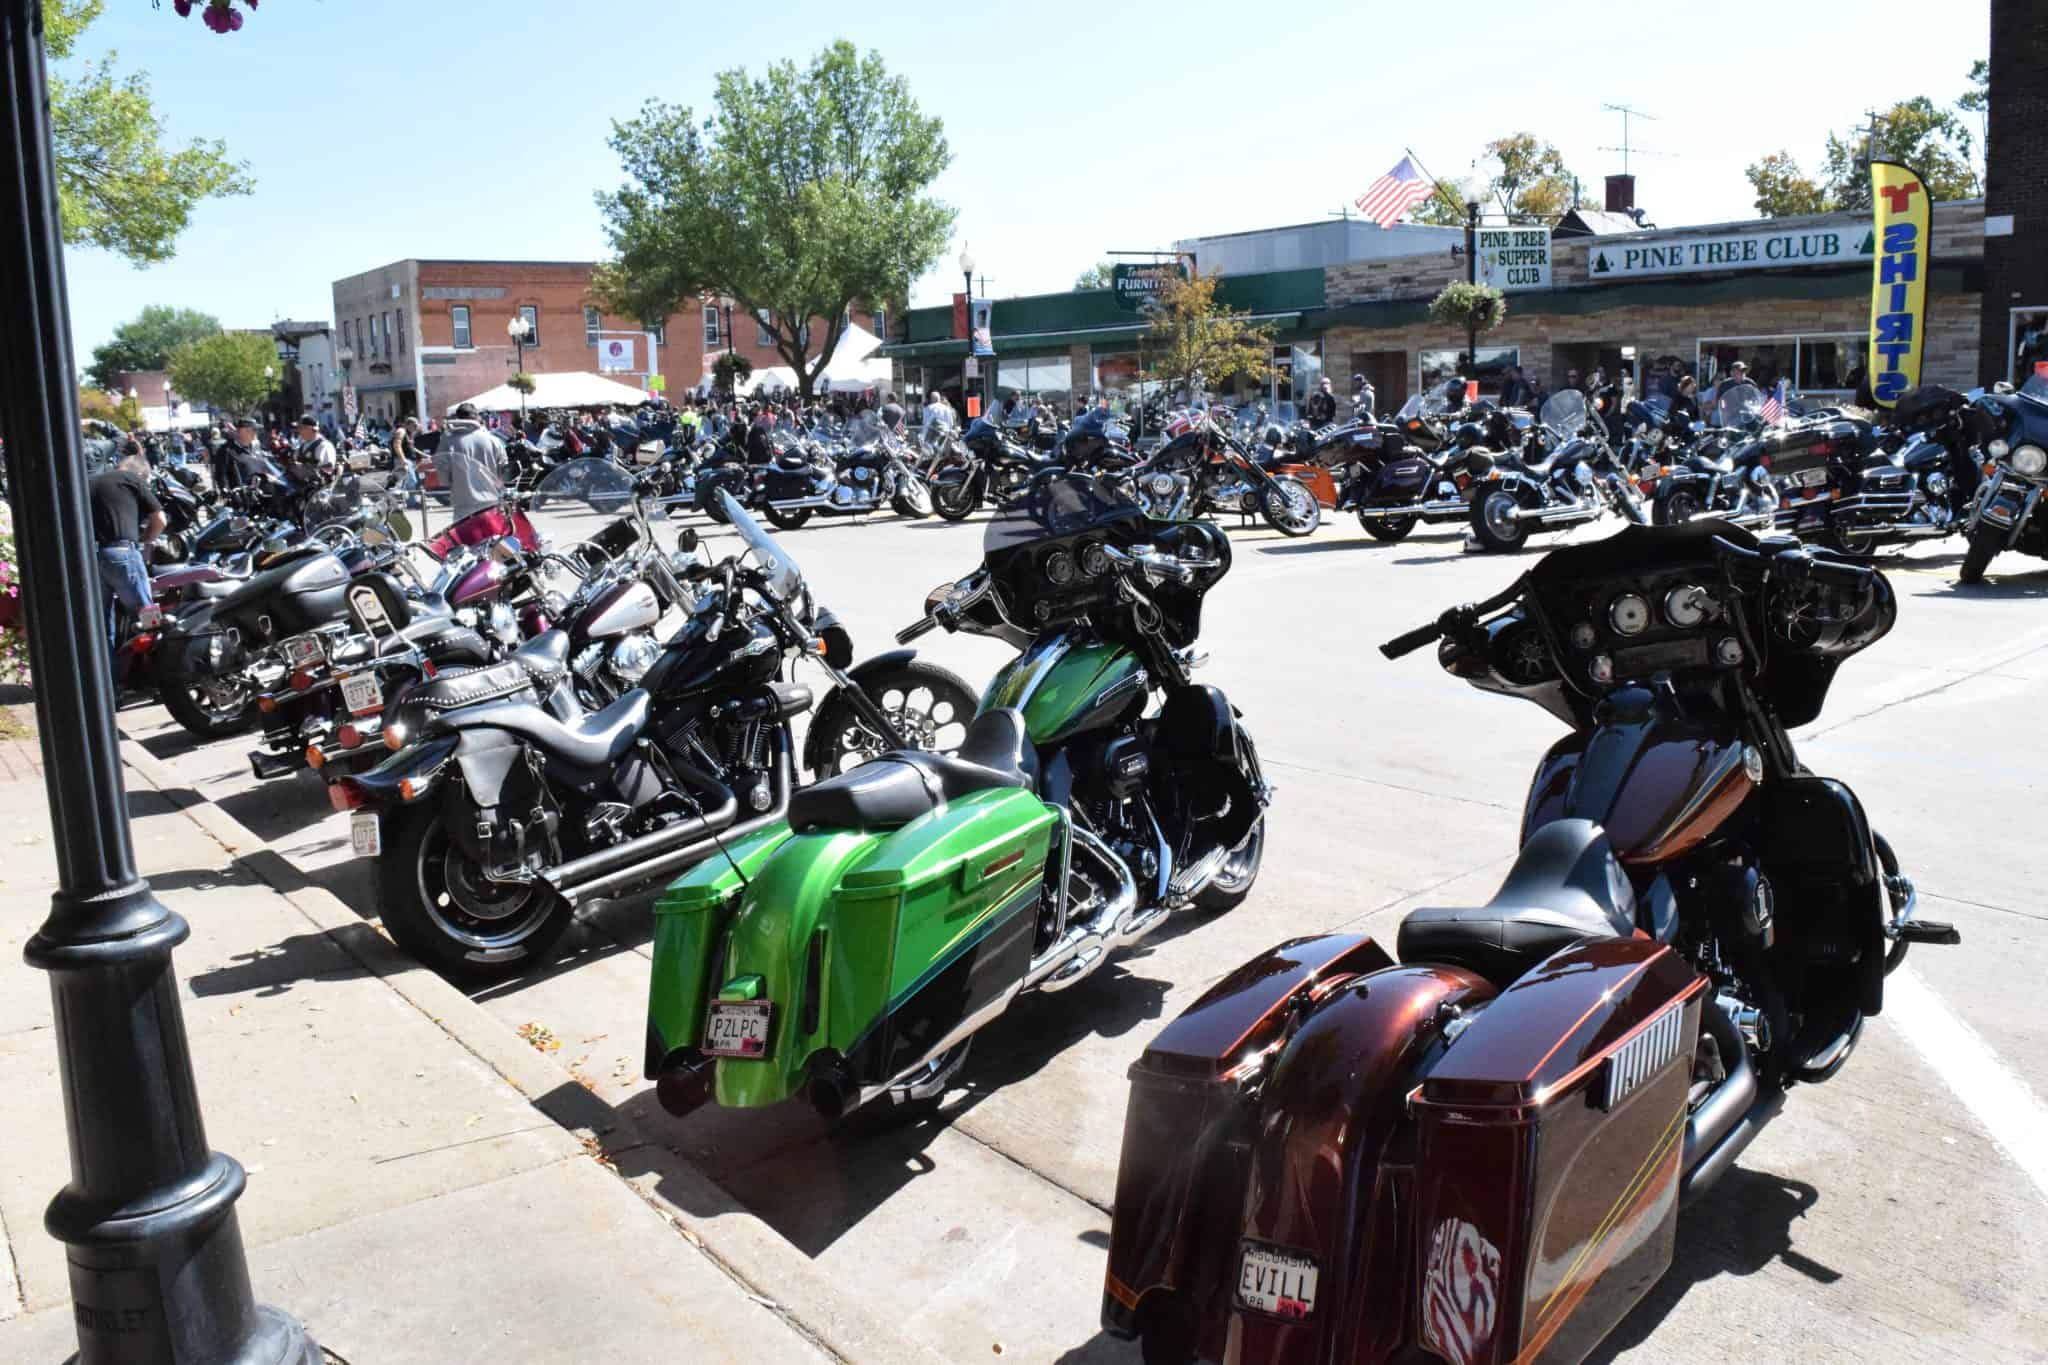 40 years of Fall Ride: Annual motorcycle rally returns to Tomahawk next week